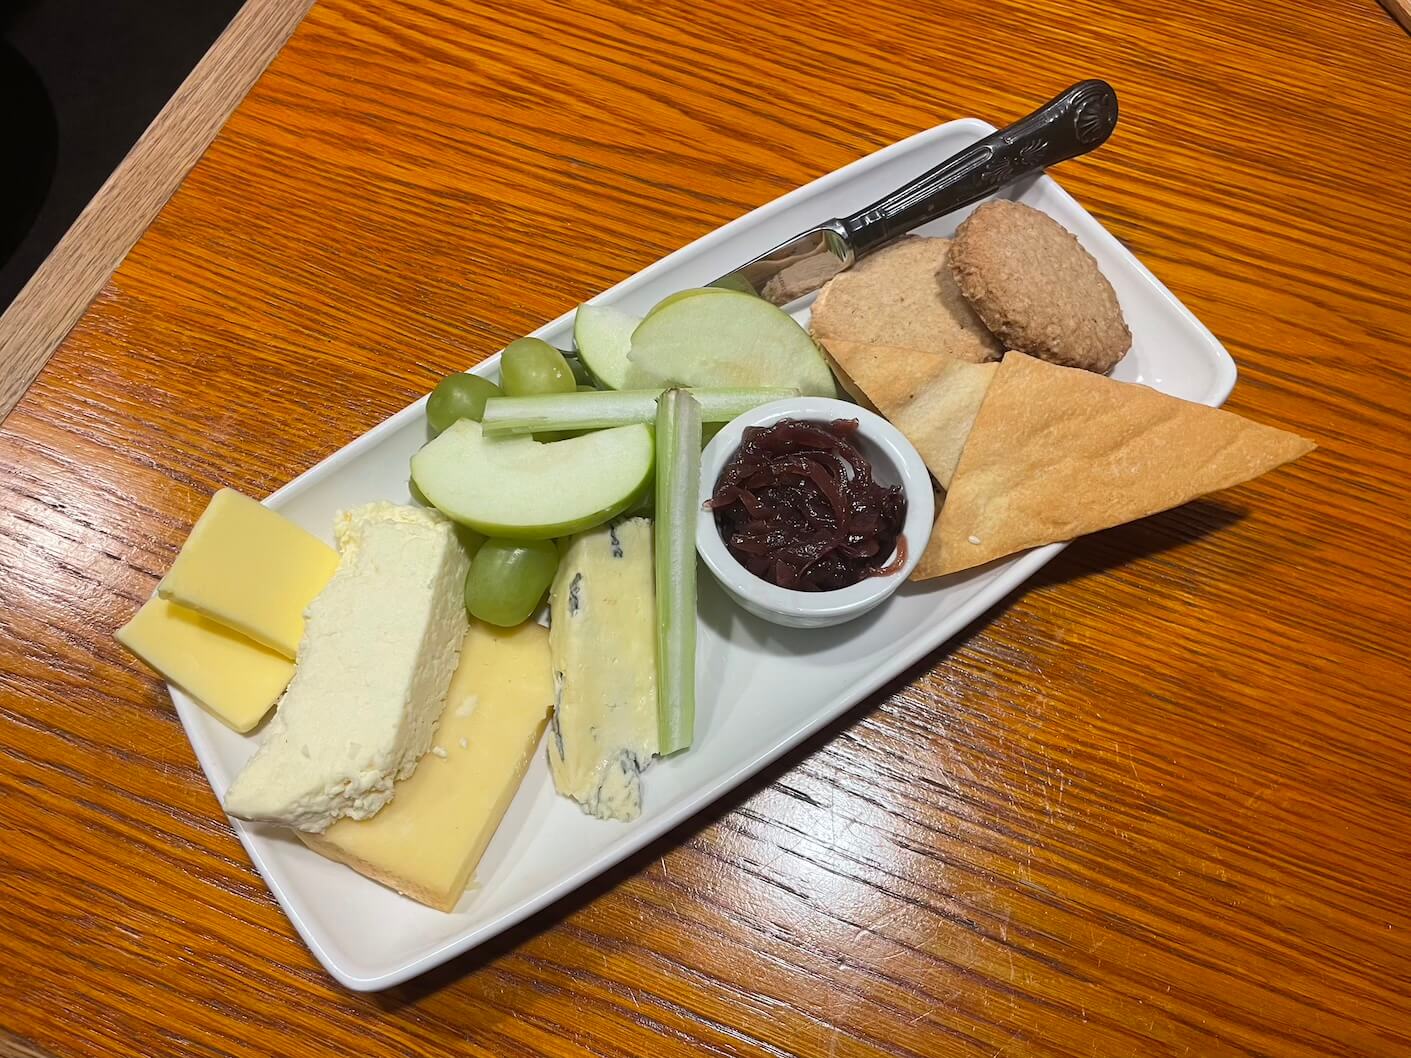 The cheese plate was composed of local Lancashire cheese and homemade biscuits